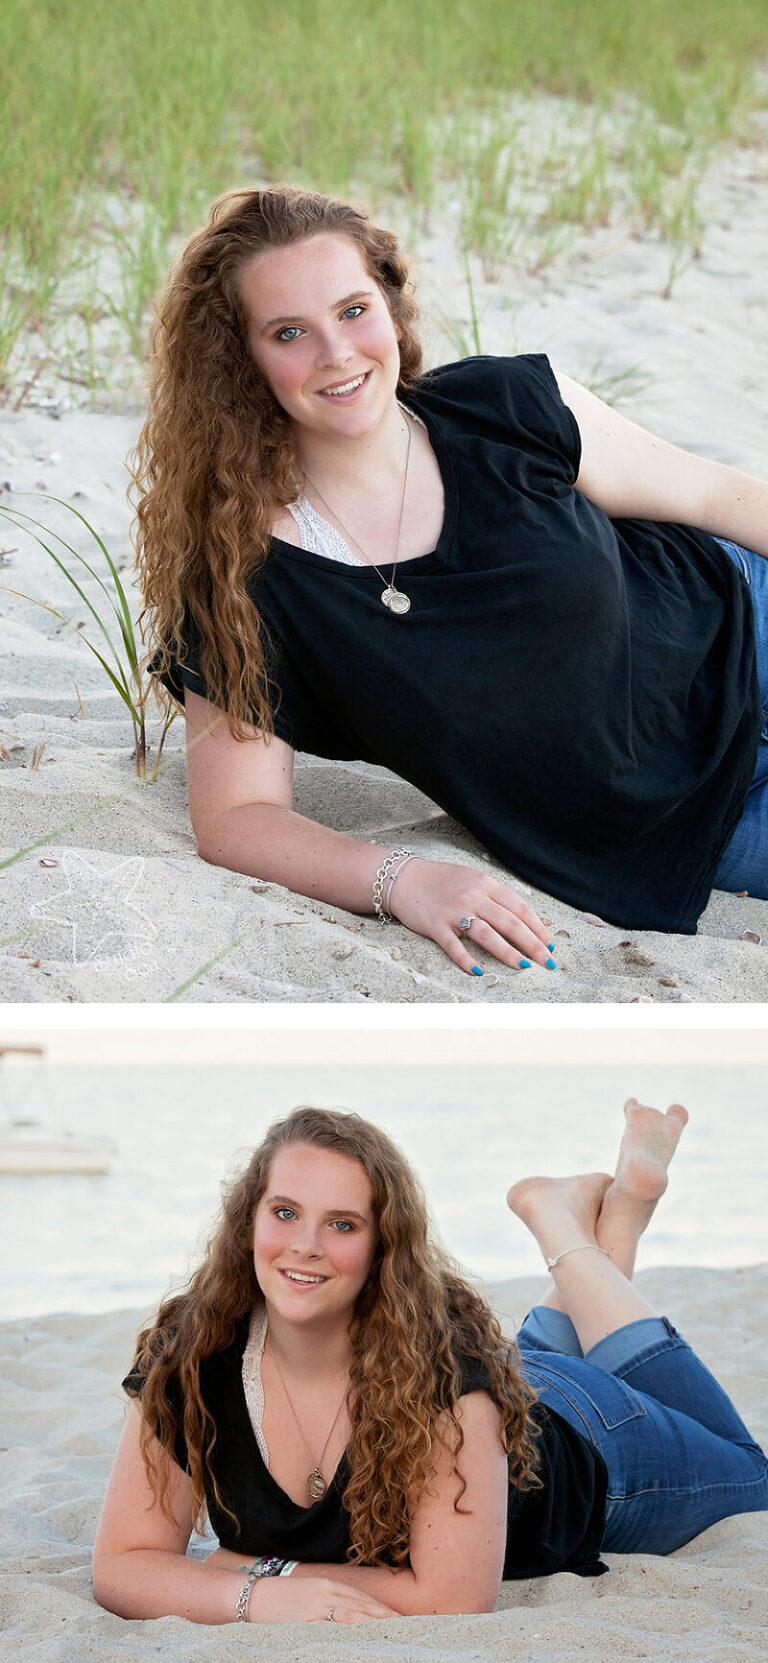 2 images of senior girl with long curly hair on lying on beach wearing black top and jeans